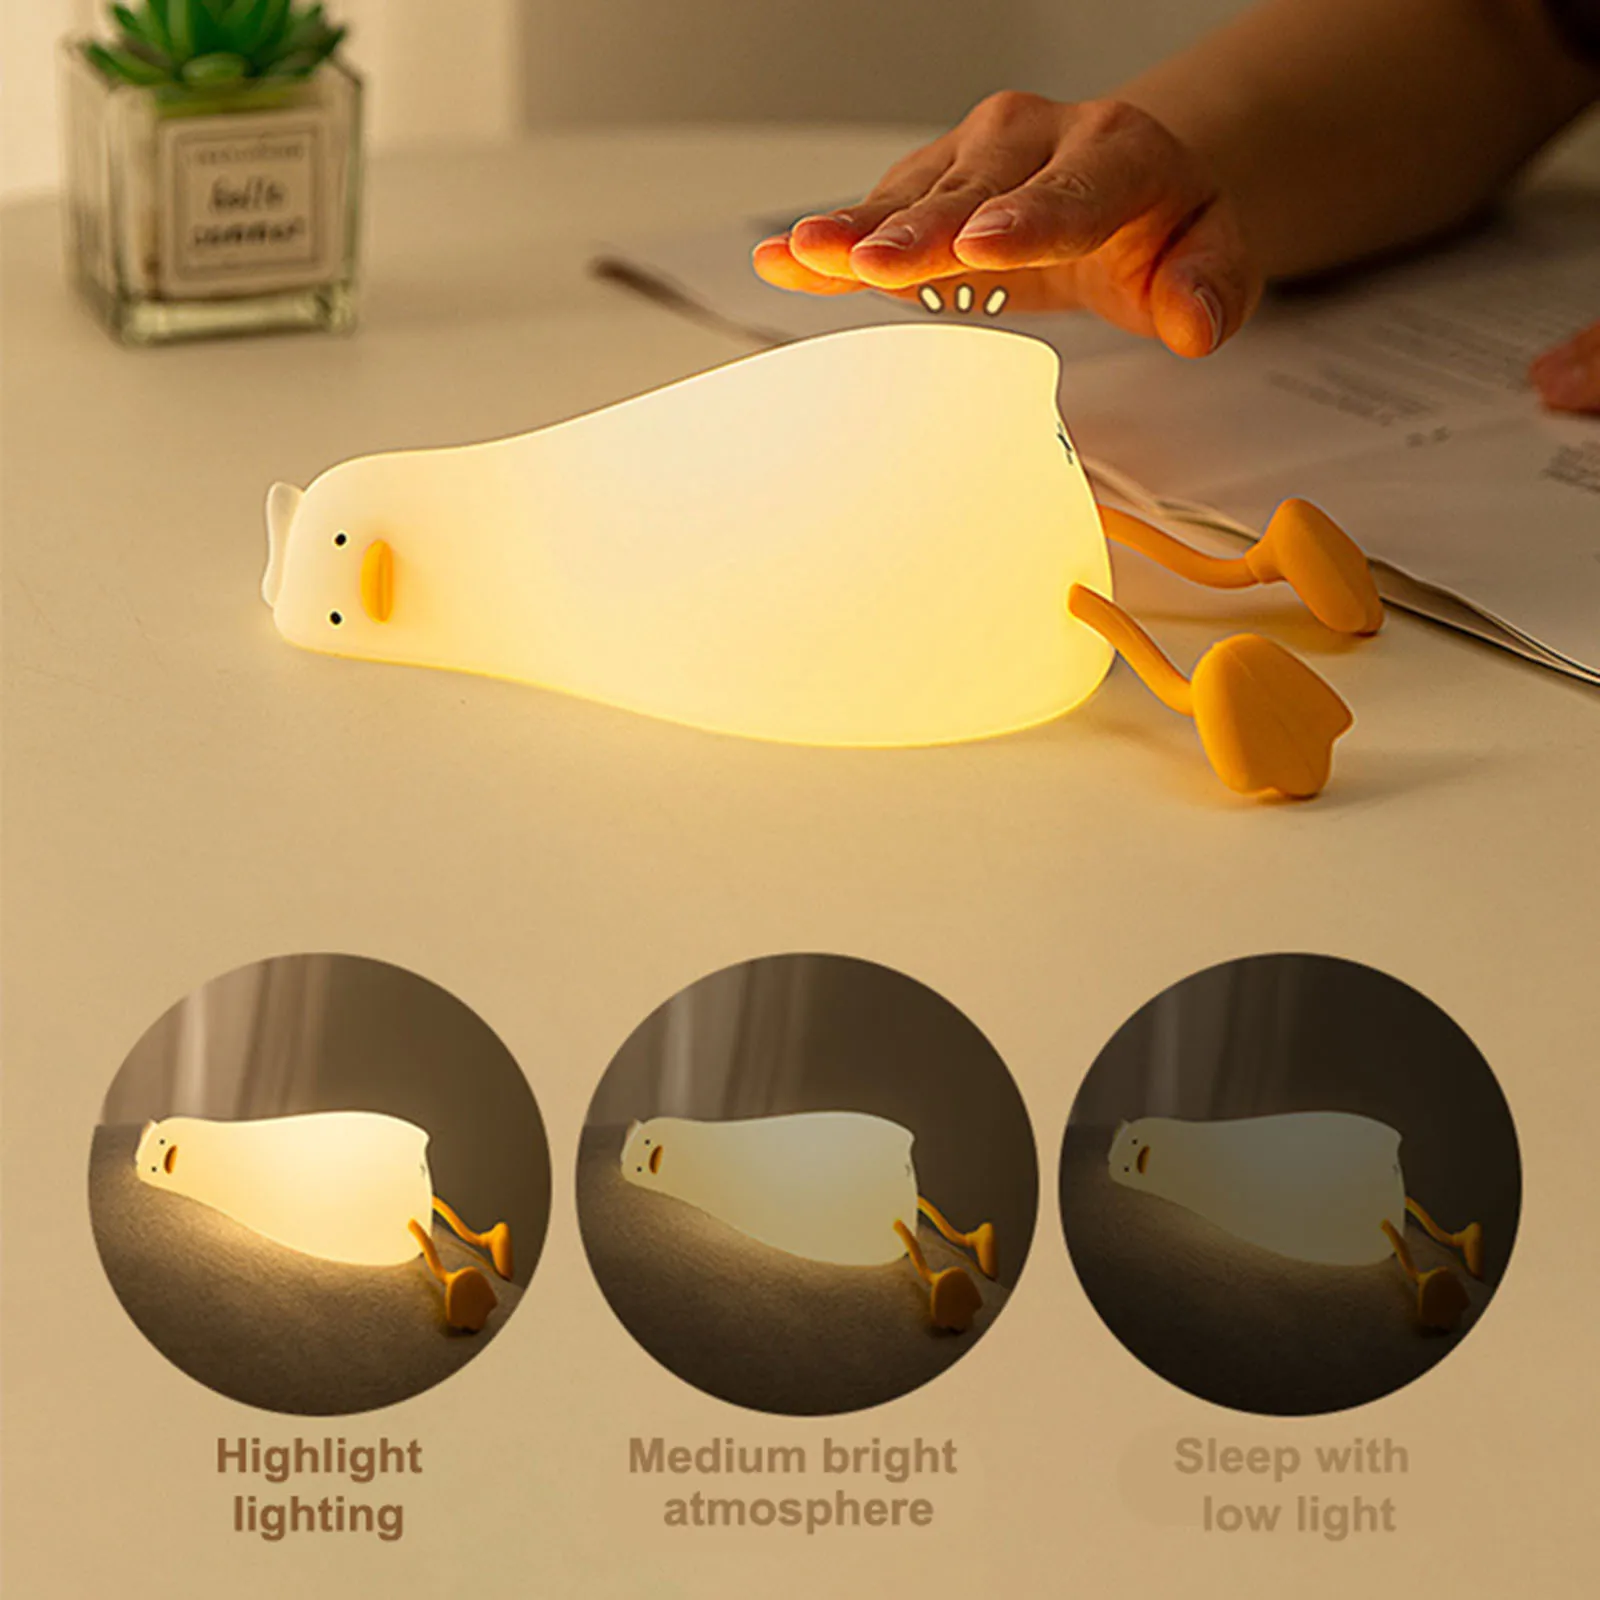 

LED Lying Flat Duck Silicone Night Light USB Charging Bedside with Sleep Night Light Pat Dimming Atmosphere Table Lamp Gift 5V